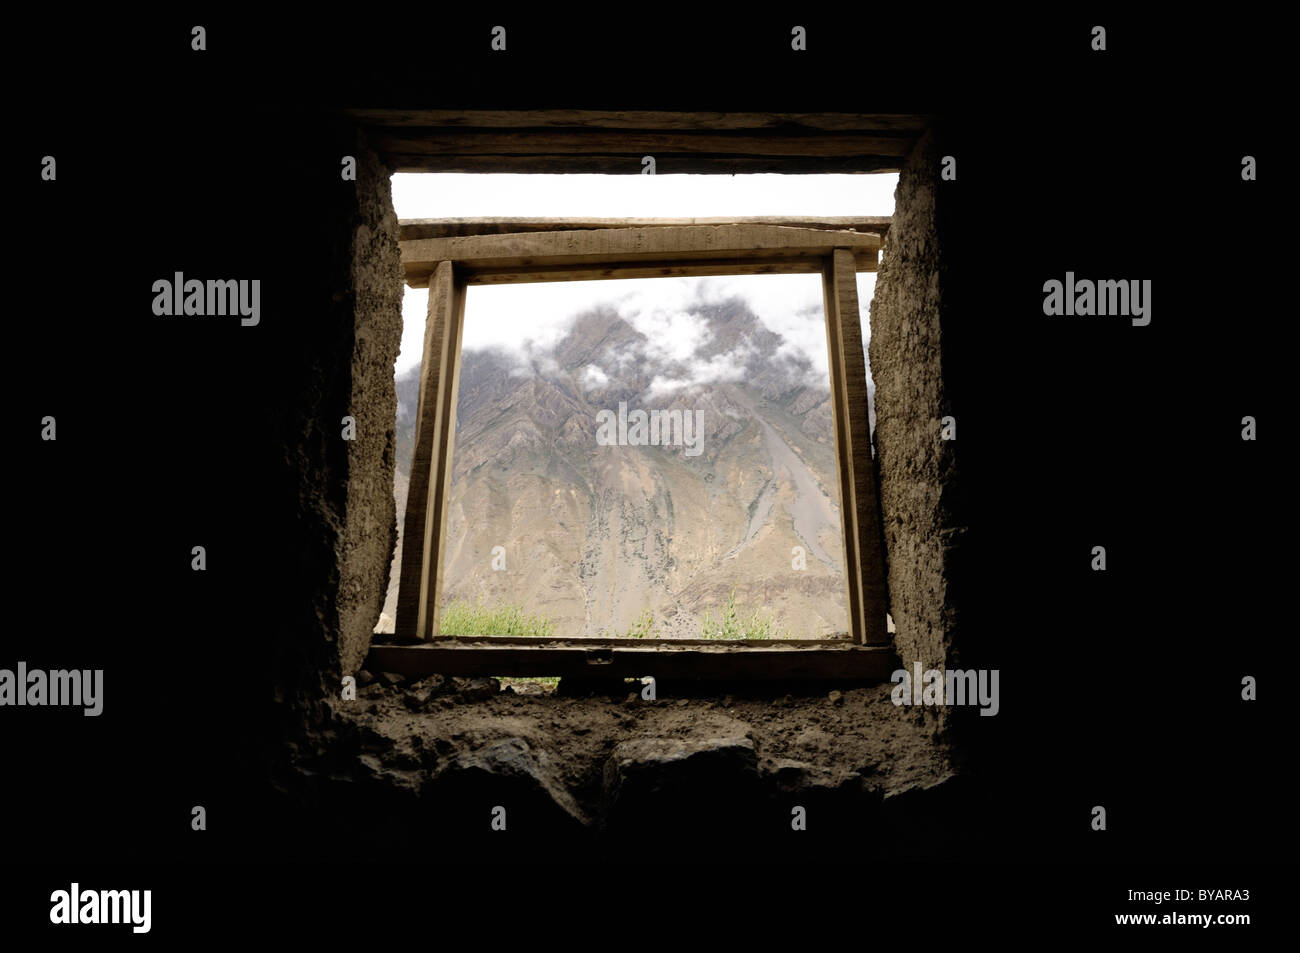 A view of the mountains in Spiti Valley from inside an abandoned mud hut, India. Stock Photo